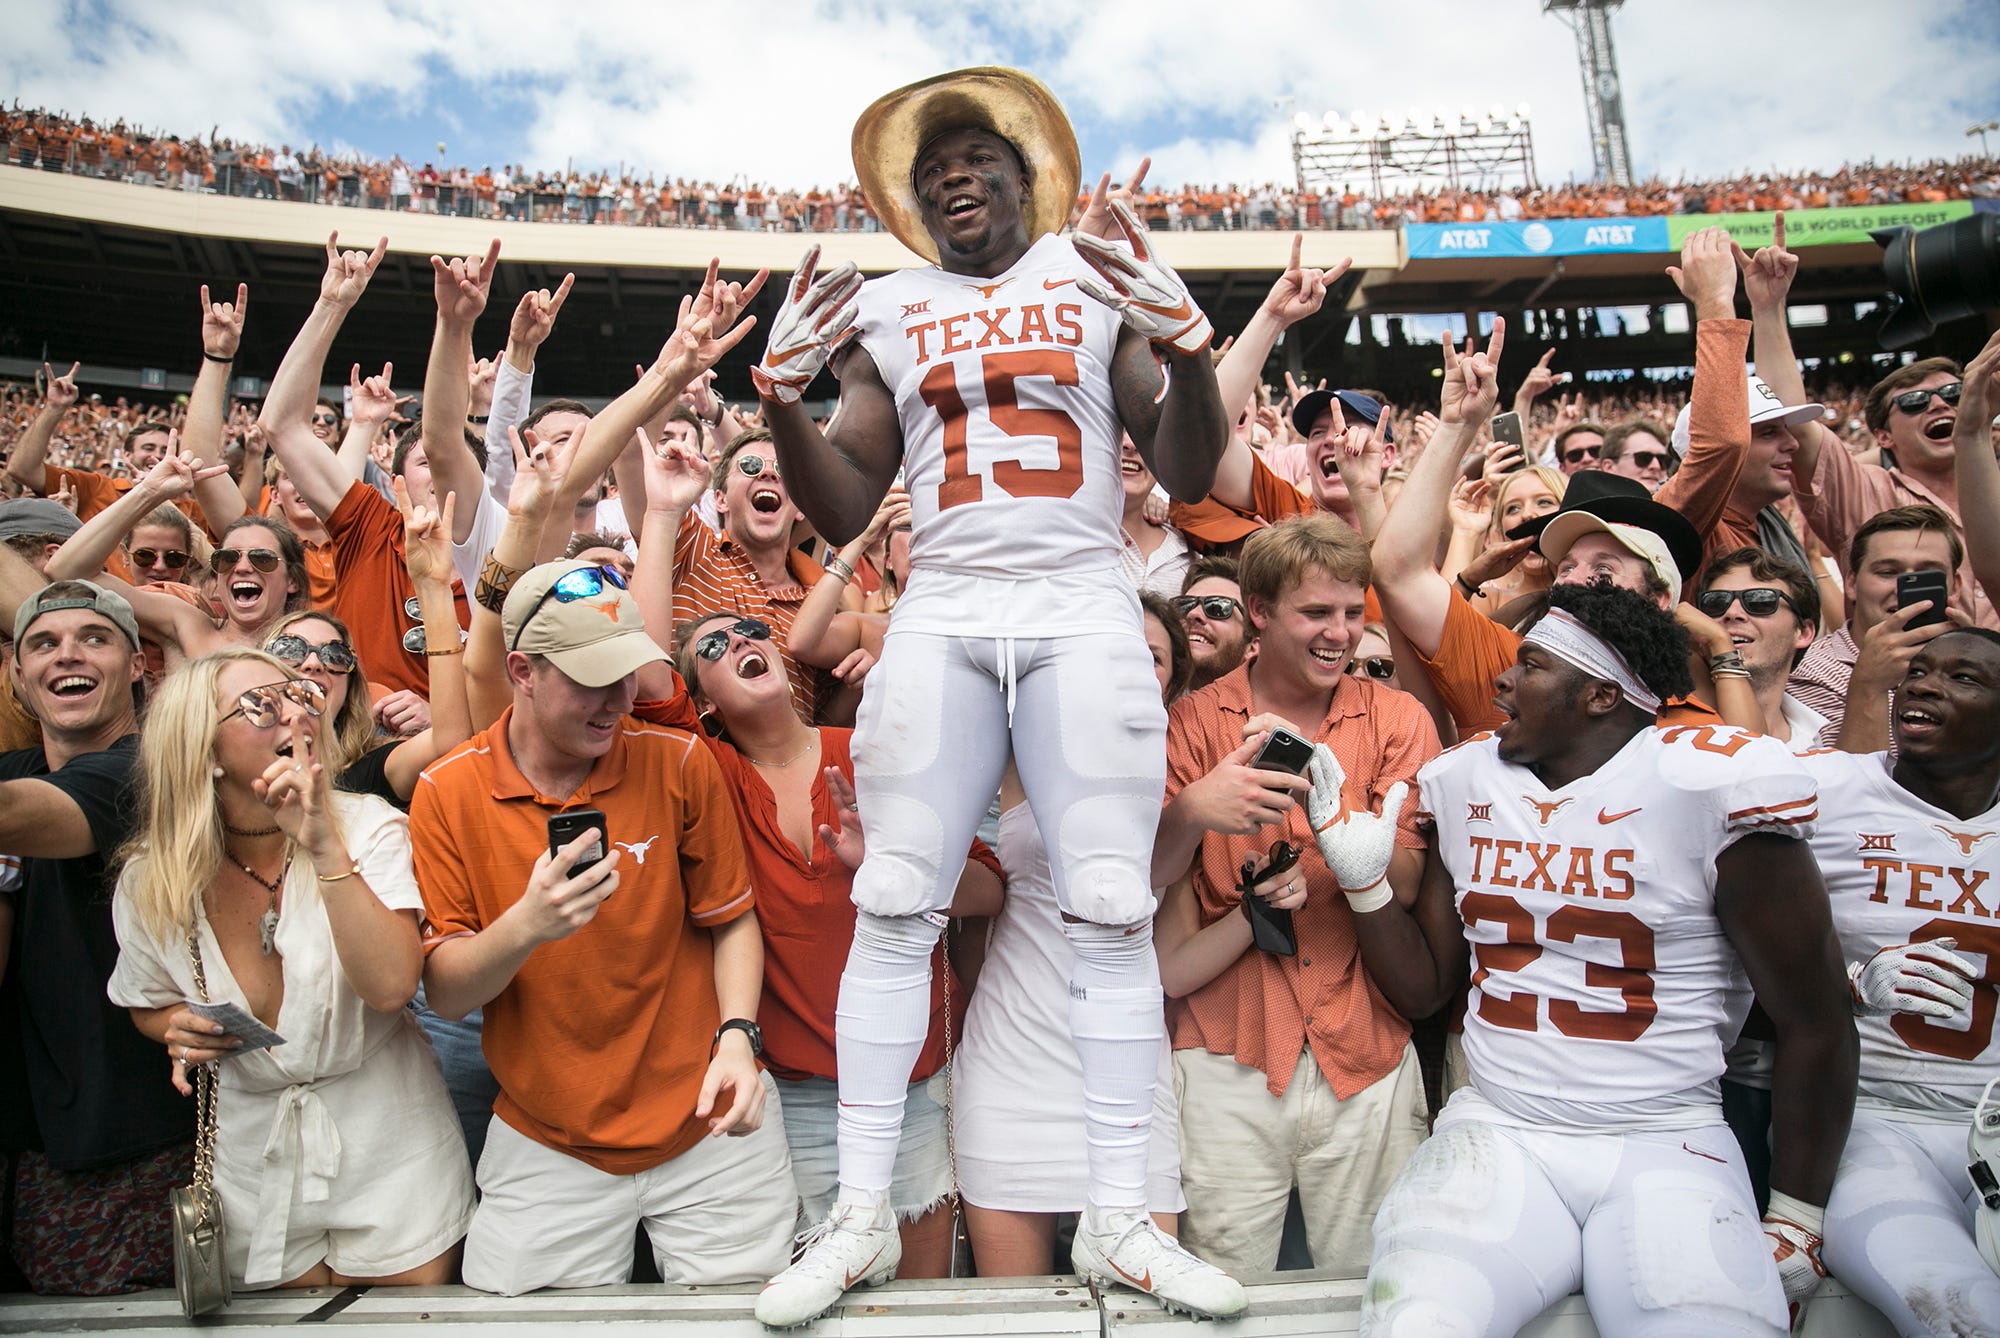 Texas hands OU historic loss in Red River Rivalry. Here are the numbers